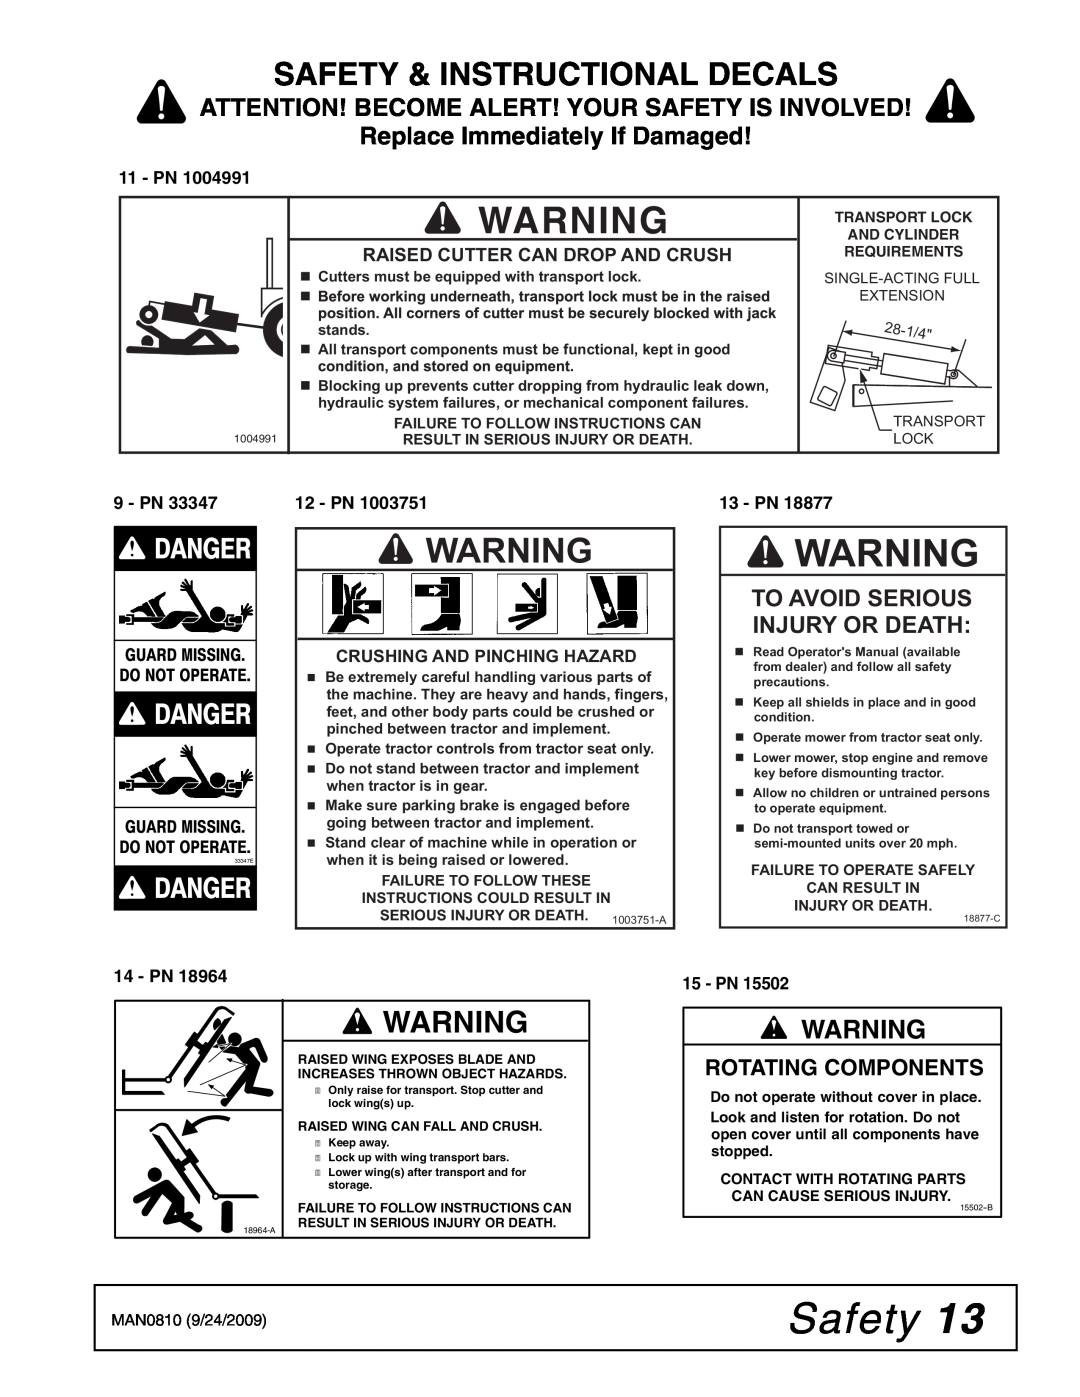 Woods Equipment BW15LH Safety & Instructional Decals, 33347E, Attention! Become Alert! Your Safety Is Involved, Pn 